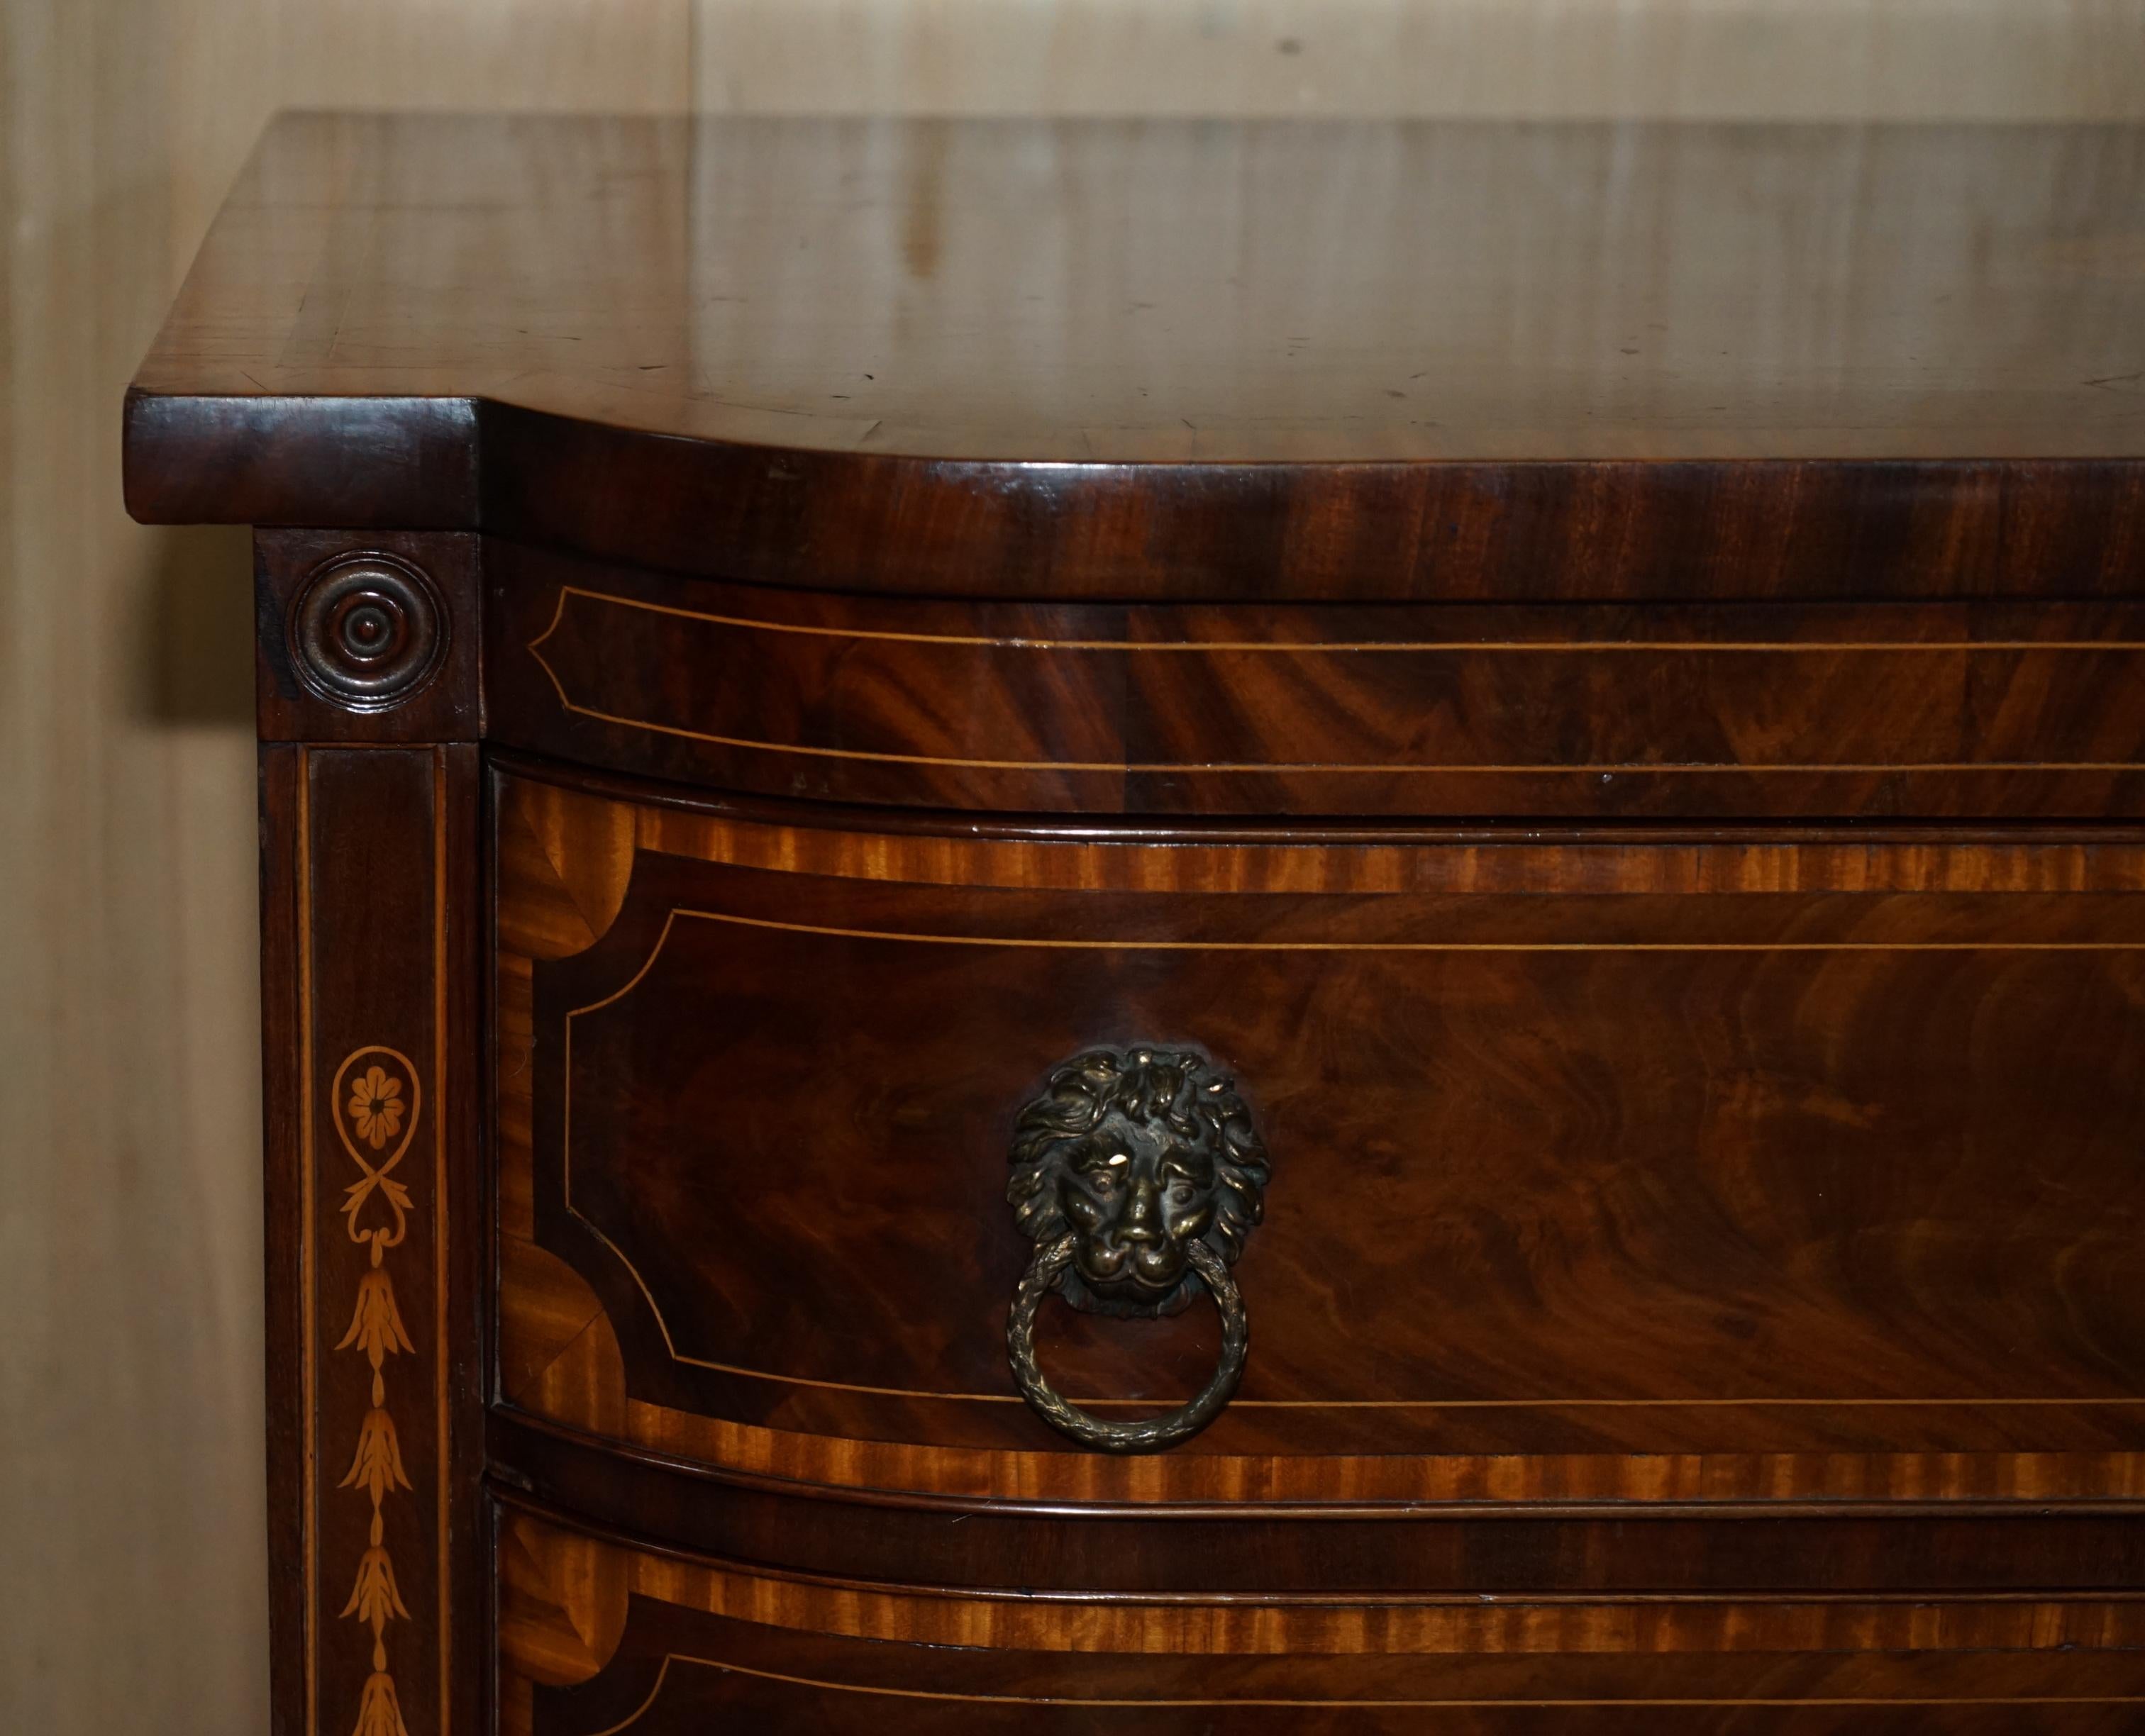 SHERATON 1859 DATED FLAMED HARDWOOD LION HEAD HANDLE CHEST OF DRAWERs (Englisch) im Angebot